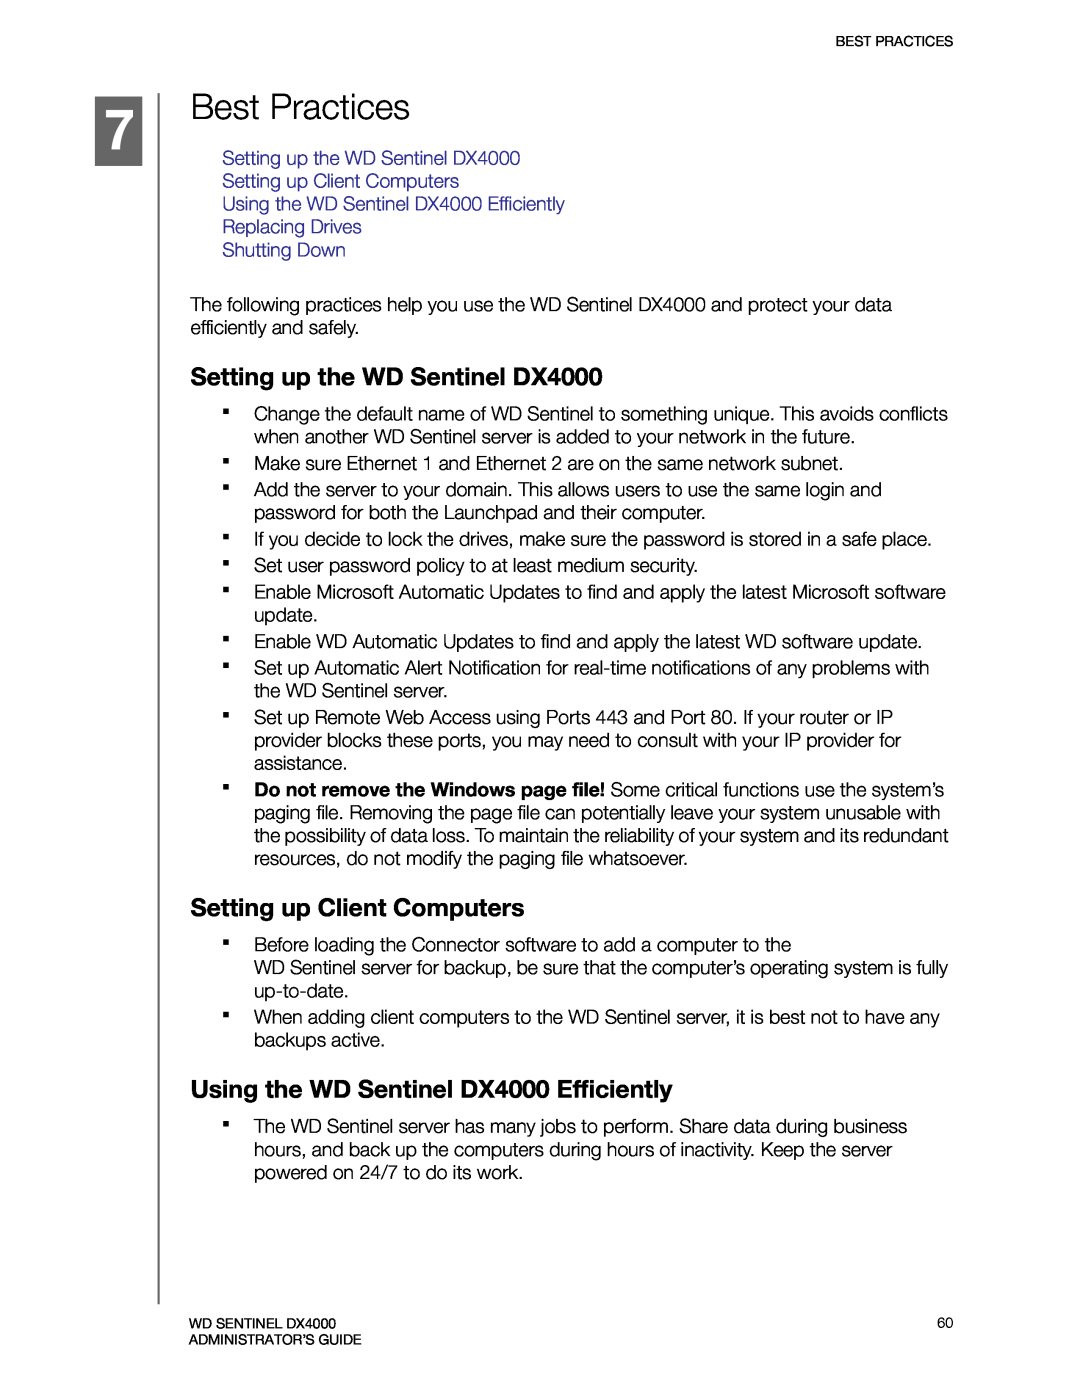 Western Digital WDBLGT0120KBK manual Best Practices, Setting up the WD Sentinel DX4000, Setting up Client Computers 